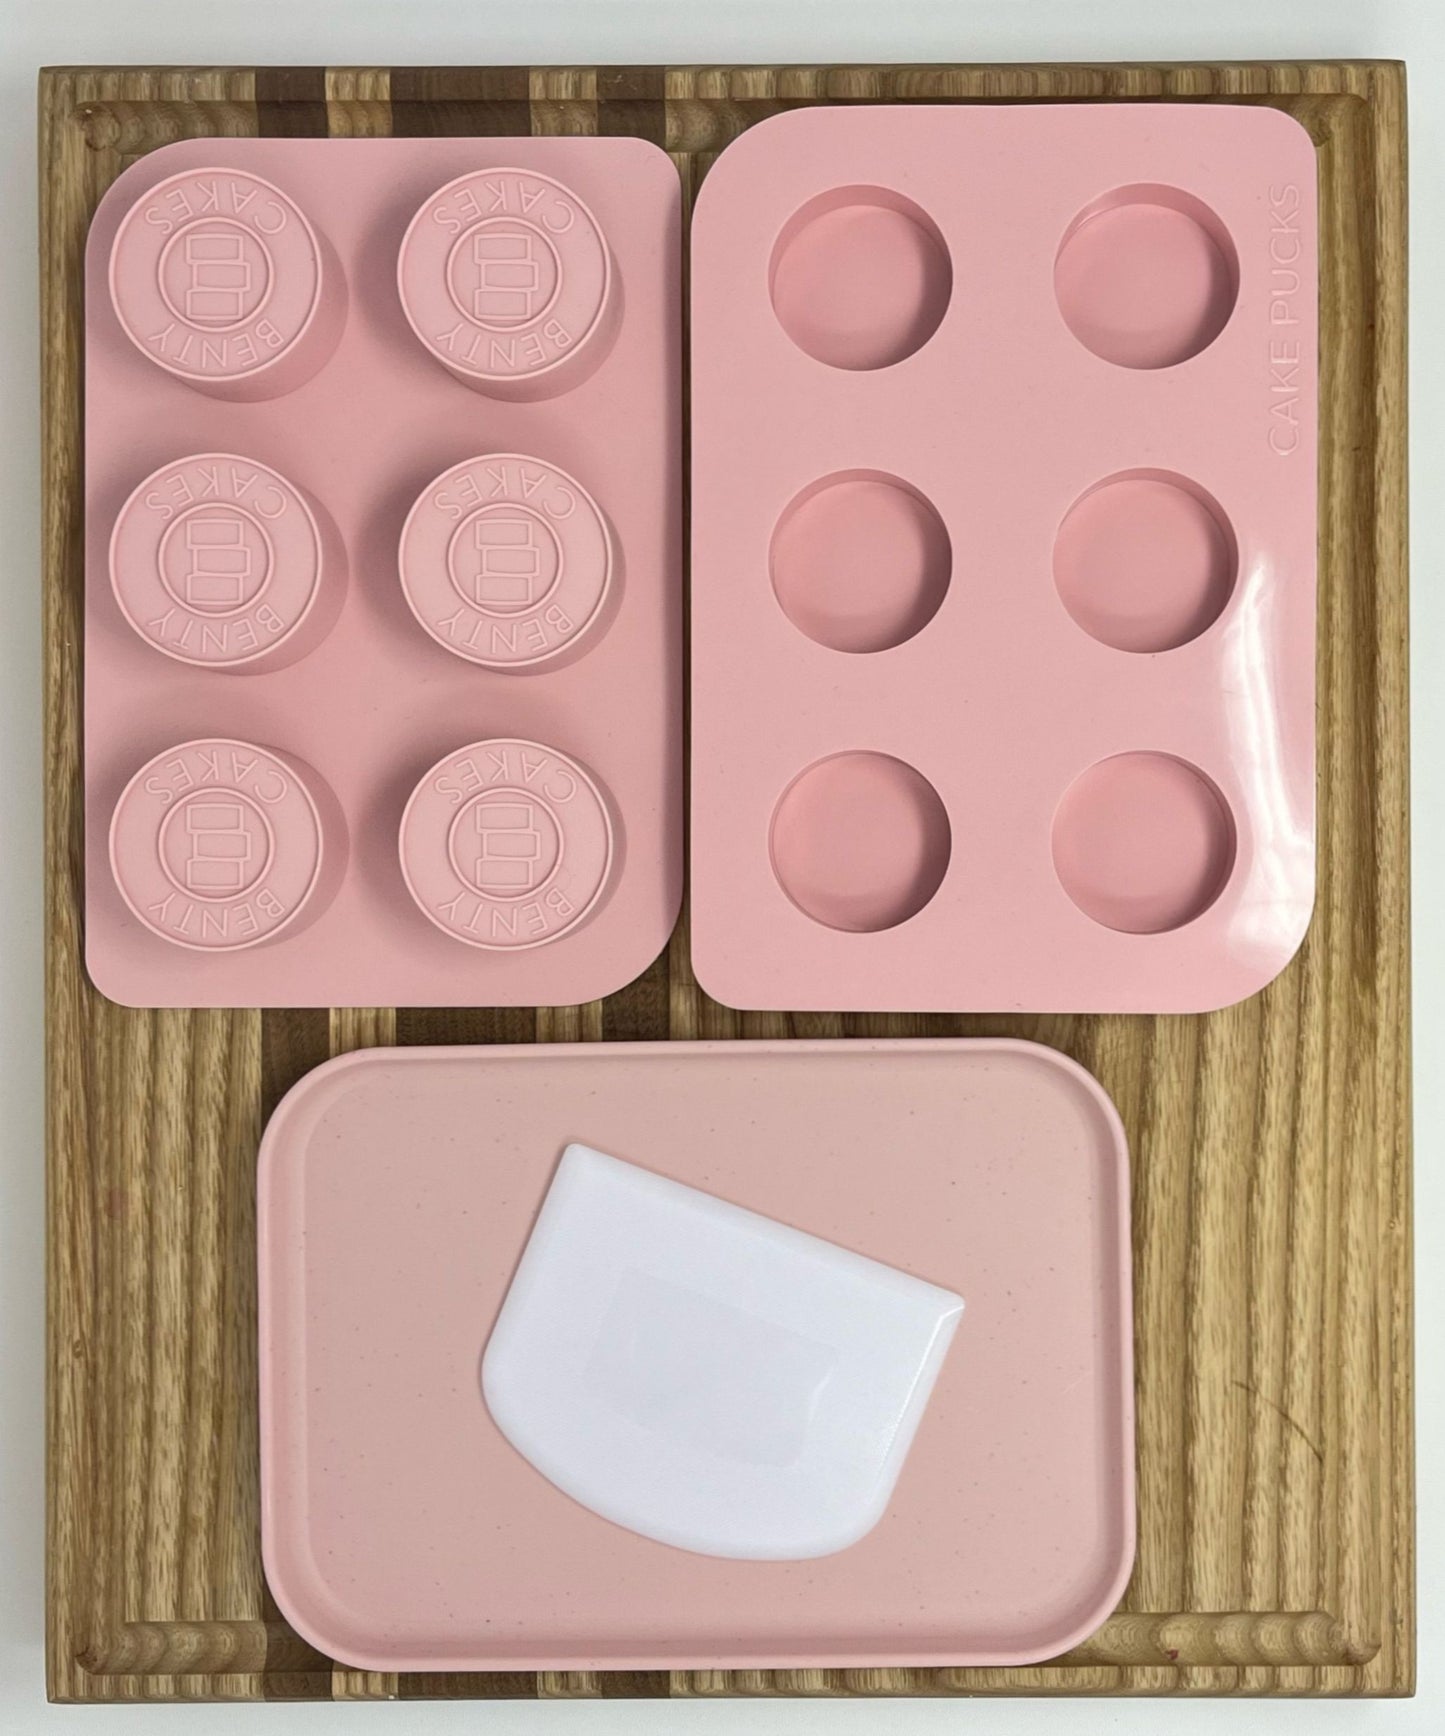 The Original CakePuck Mold Set, BPA Free Silicone Mold for Chocolate/Candy